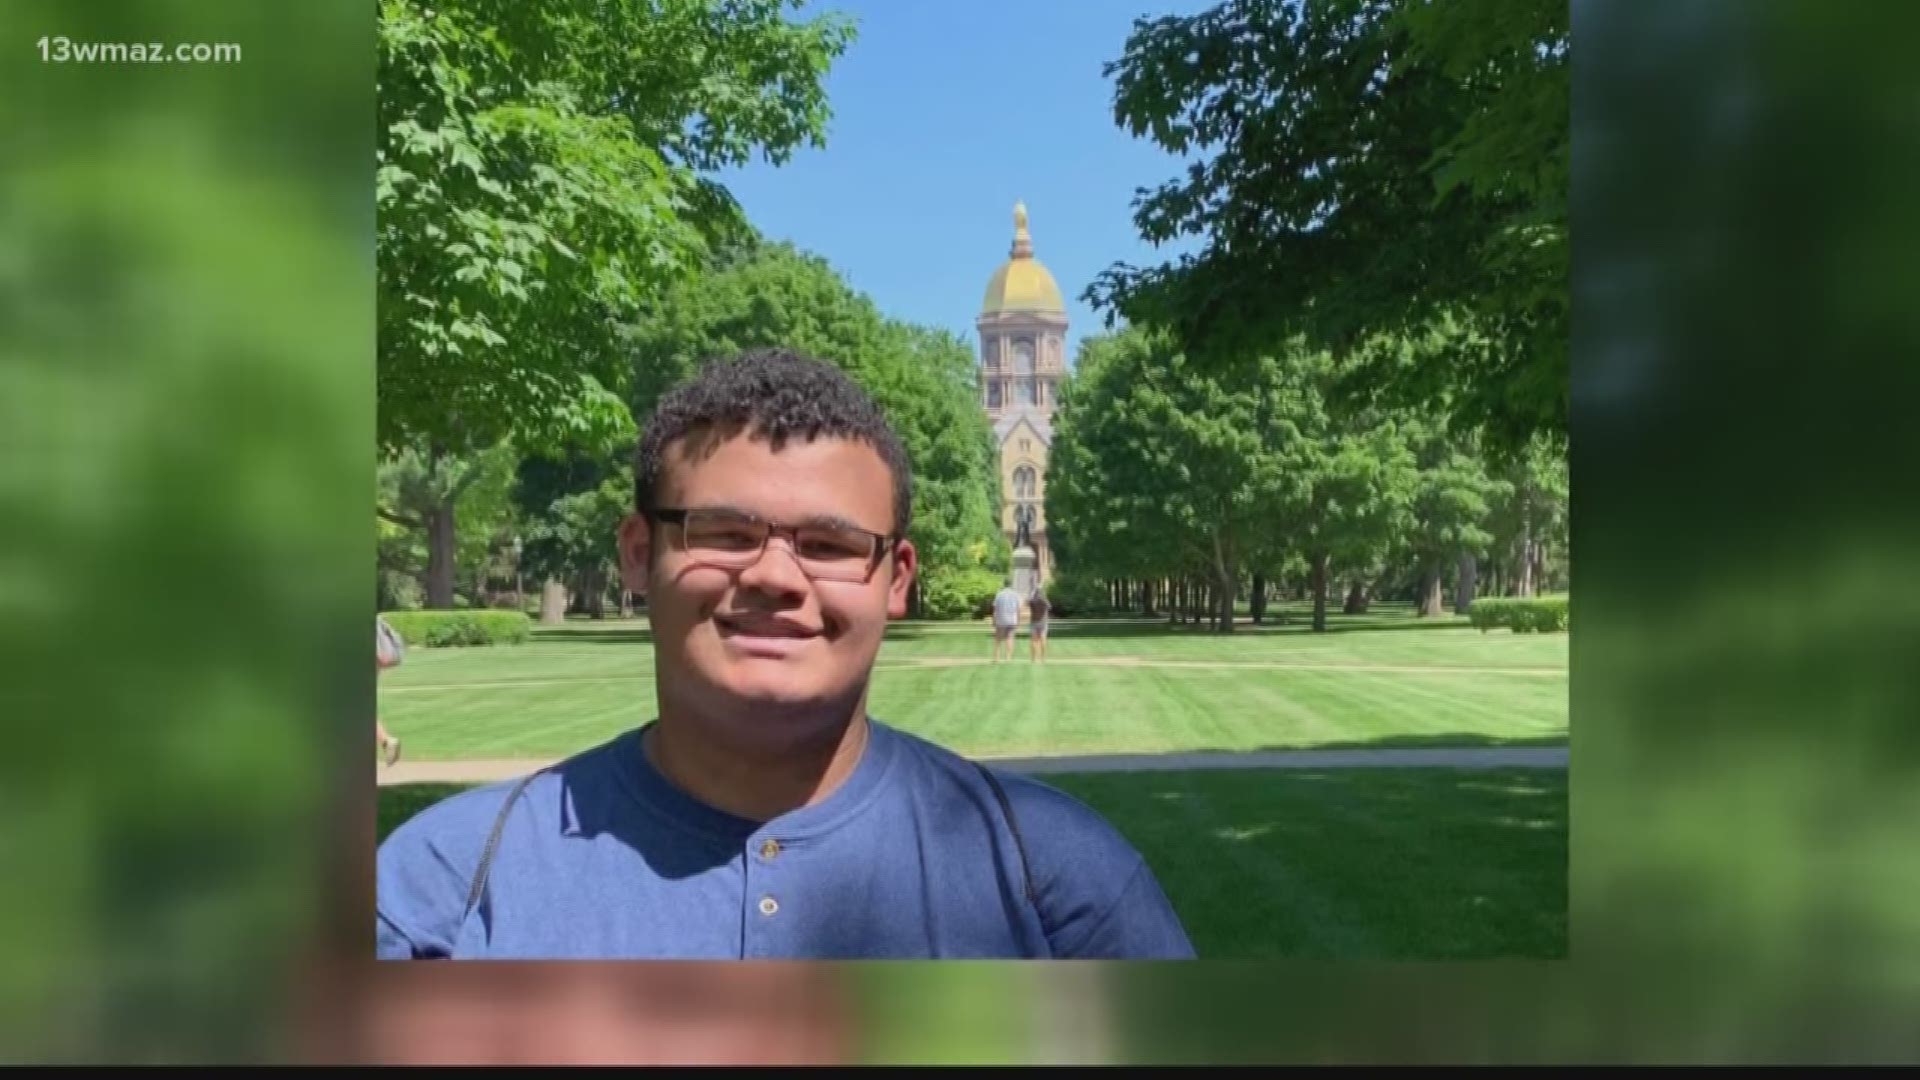 A Bibb County High School senior earned a scholarship to Notre Dame through a national non-profit that awards scholarships to high-achieving, low-income students.